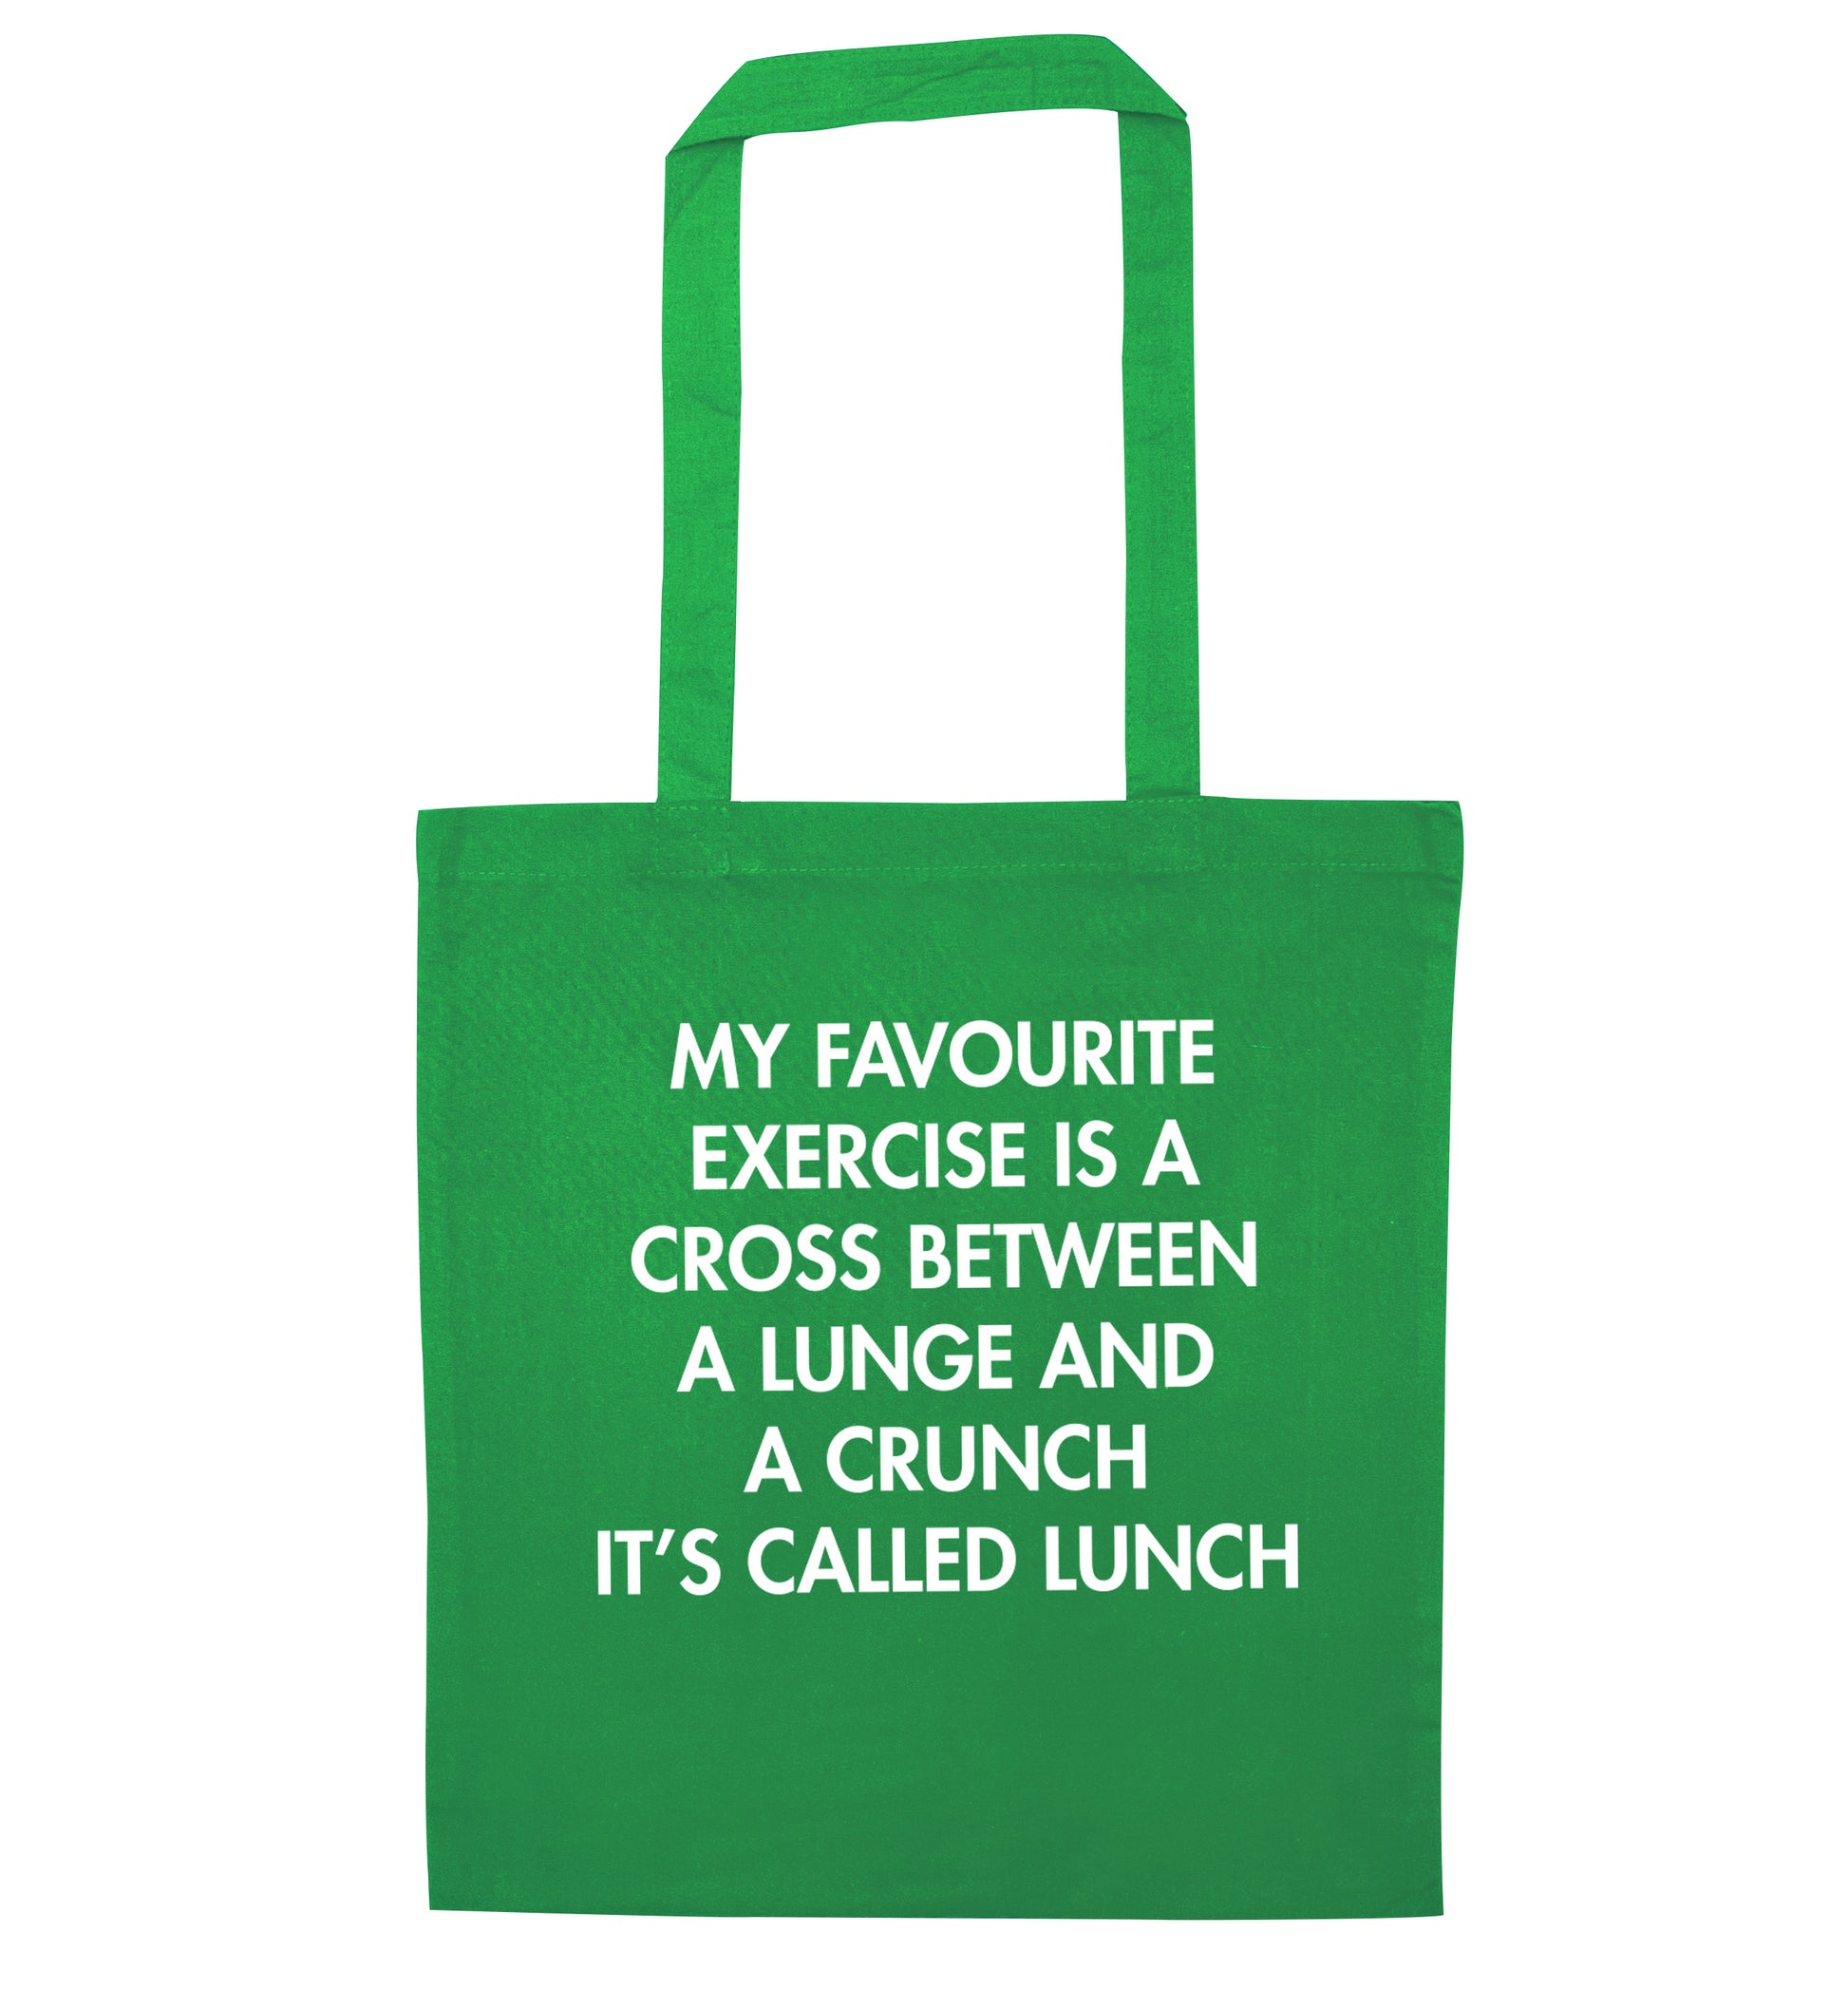 My favourite exercise is a cross between a lung and a crunch it's called lunch green tote bag